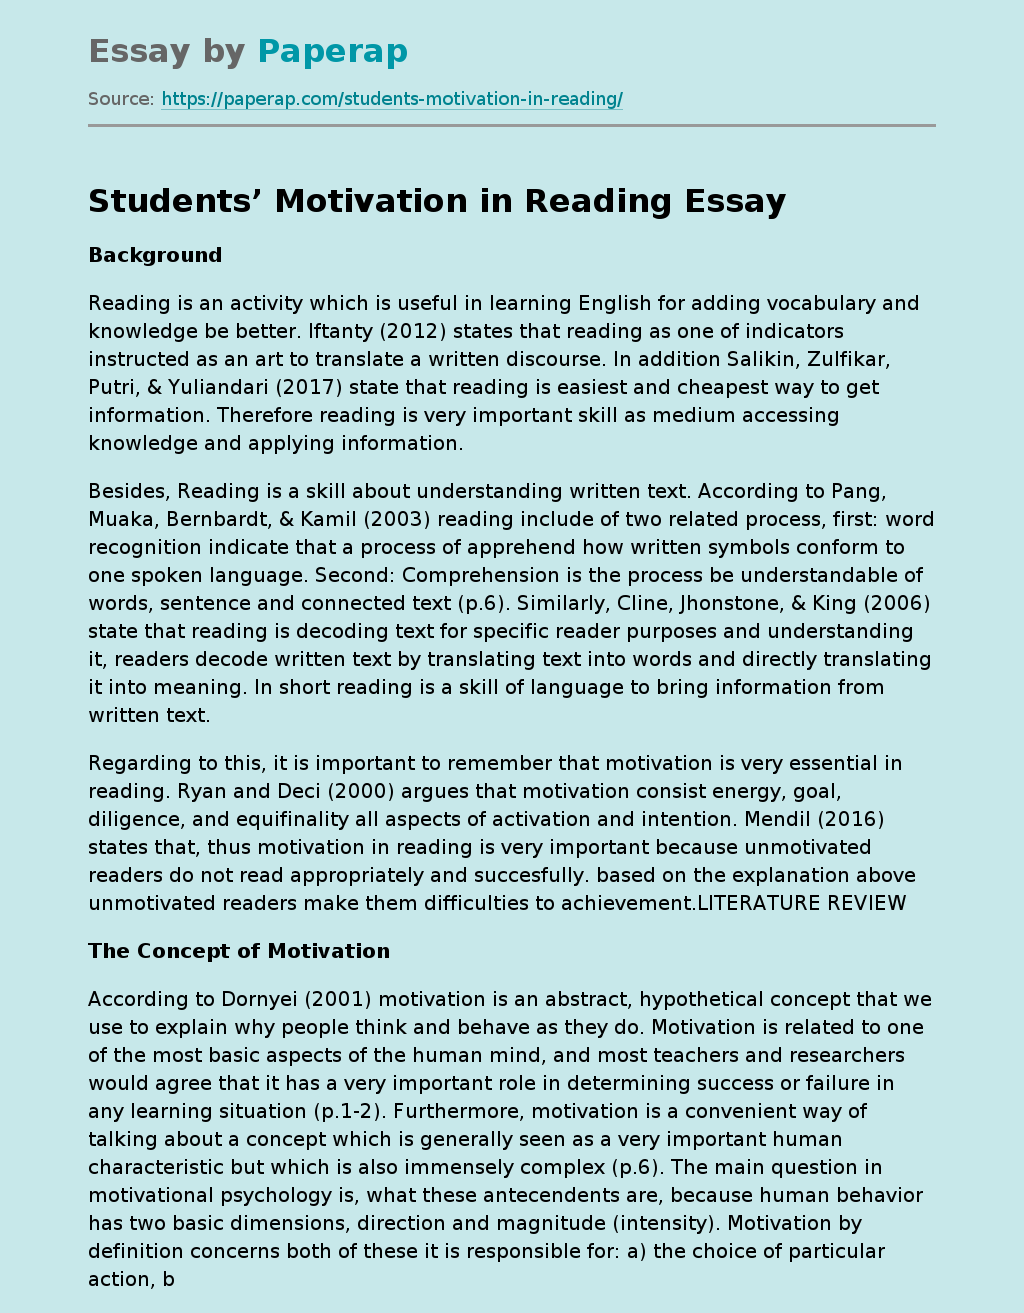 Students’ Motivation in Reading